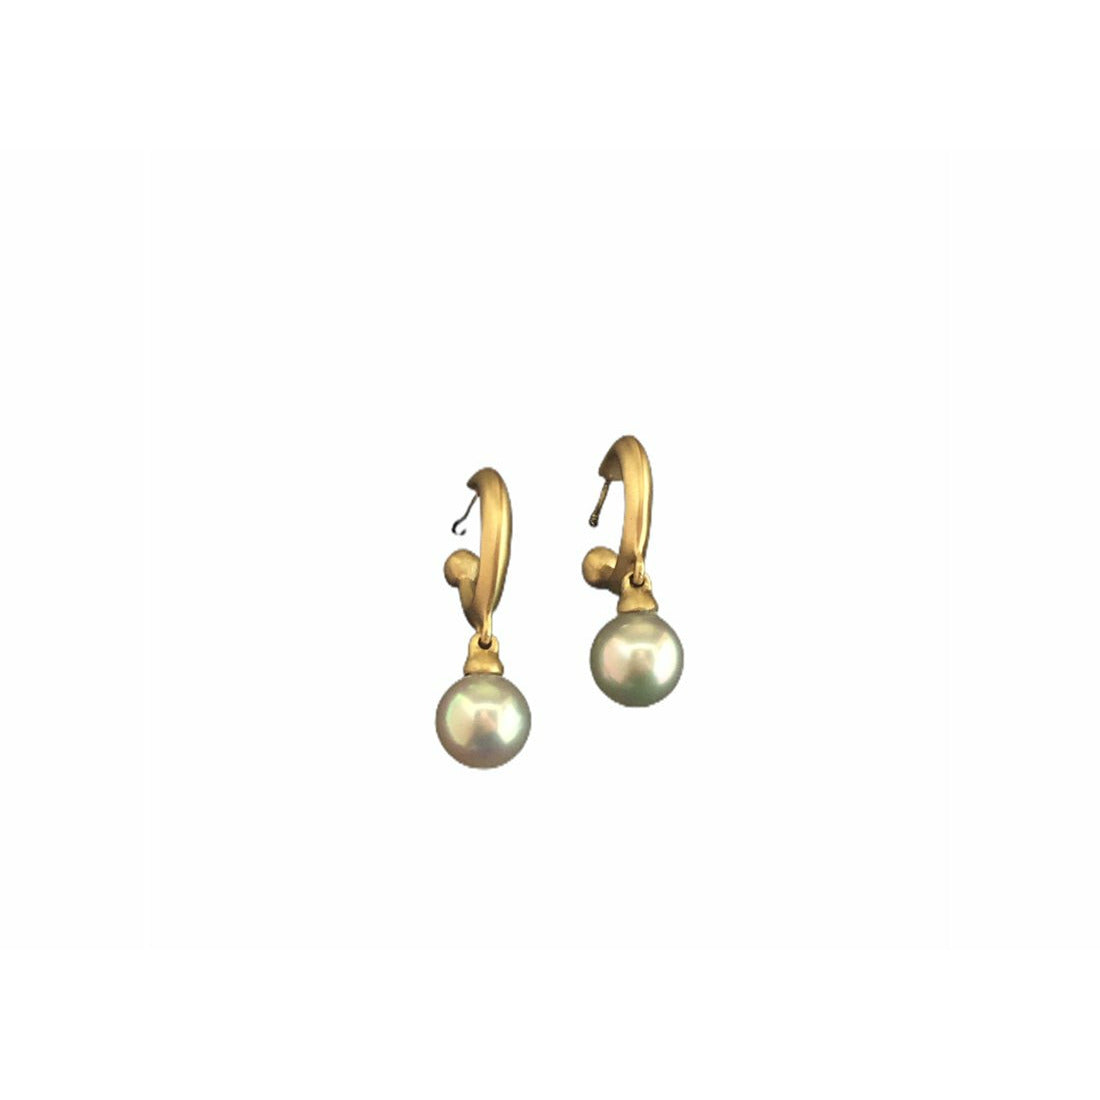 Details  Introducing the Classic Pearl Hoop Earring, a timeless design that adds an elegant touch to any outfit. Crafted with high-quality materials, these earrings are perfect for both formal occasions and everyday wear.  Hoop 15MM  8-10 MM WHITE JAPANESE ROUND PEARL